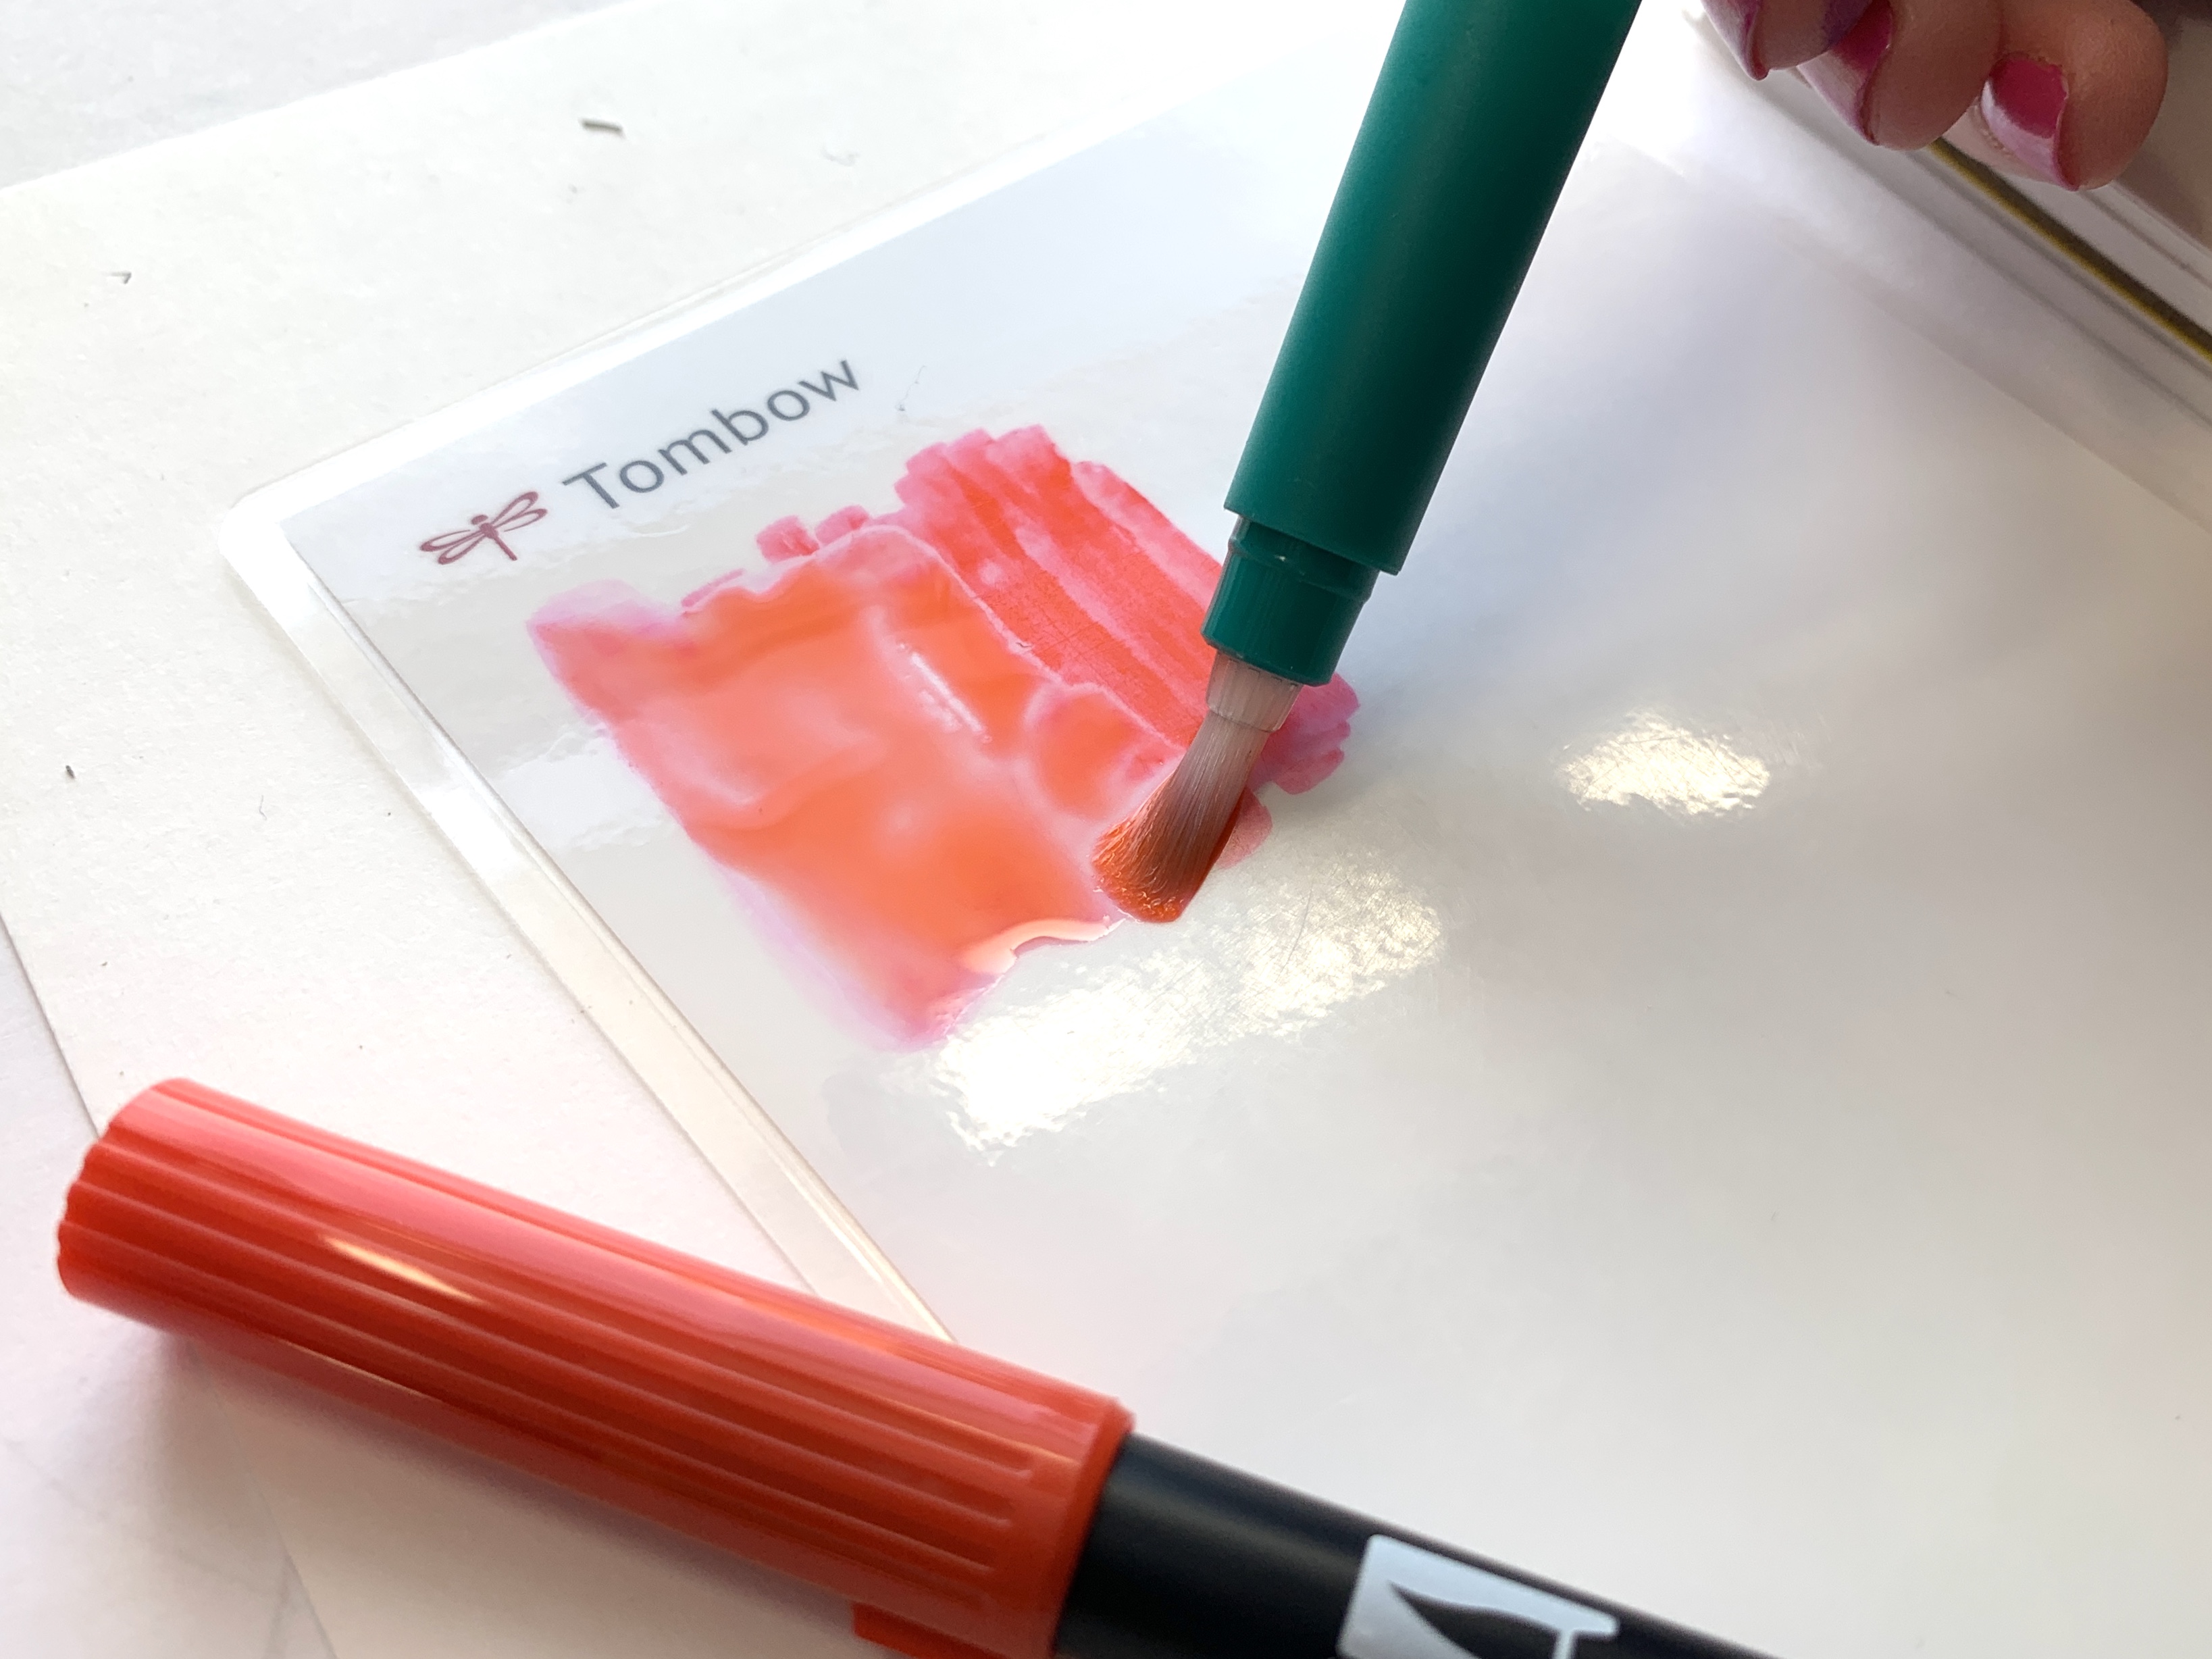 Use the @TombowUSA Water Brush for your next art project! Tutorial by @LePereLetters. #waterbrushart #easyartprojectideas